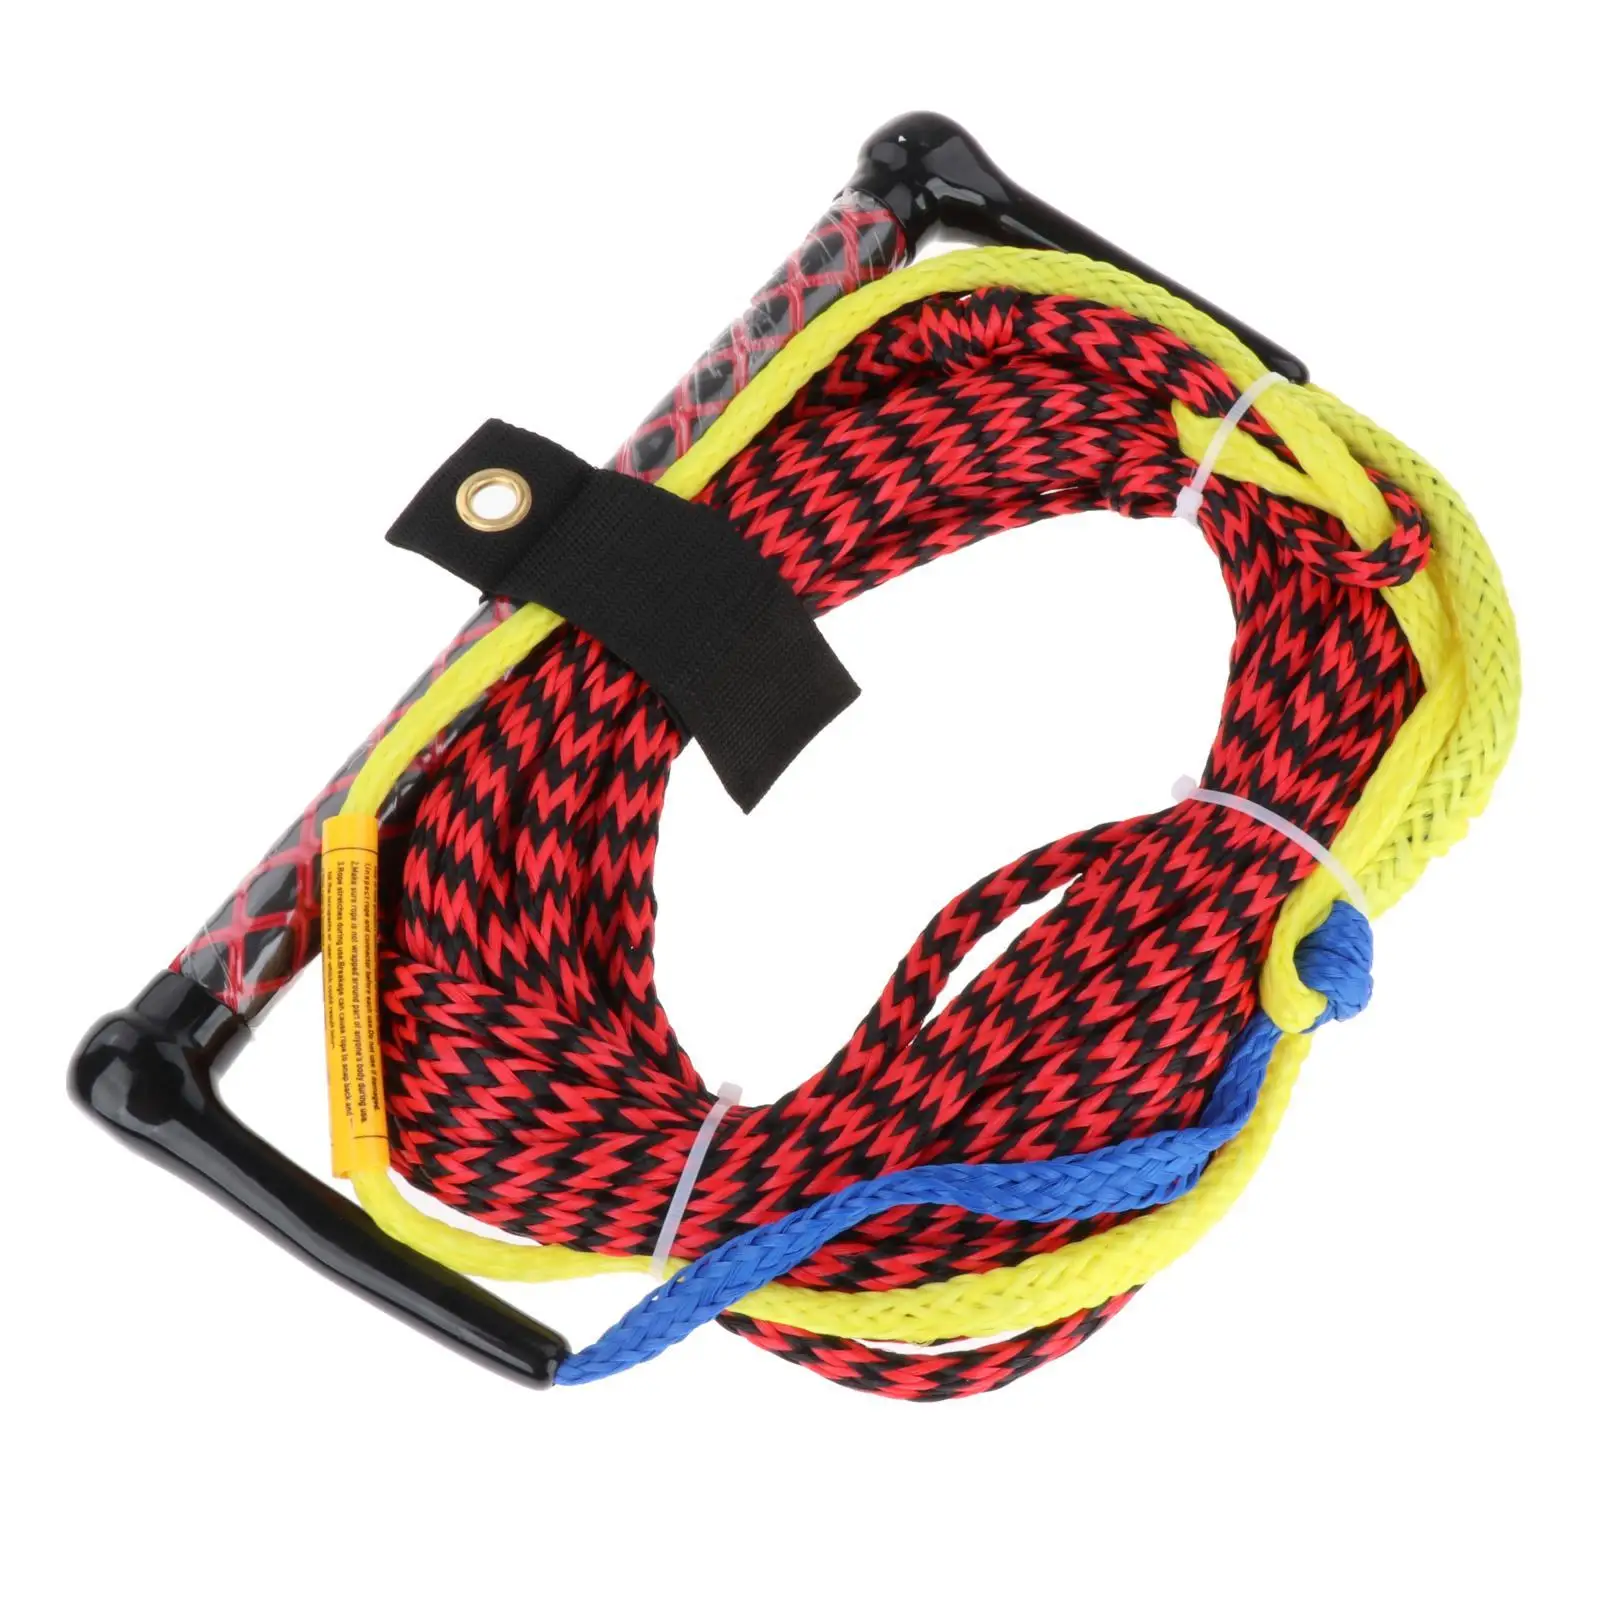 Water Ski Surf Rope Floatable 75ft Accs Multipurpose with Handle Tow for